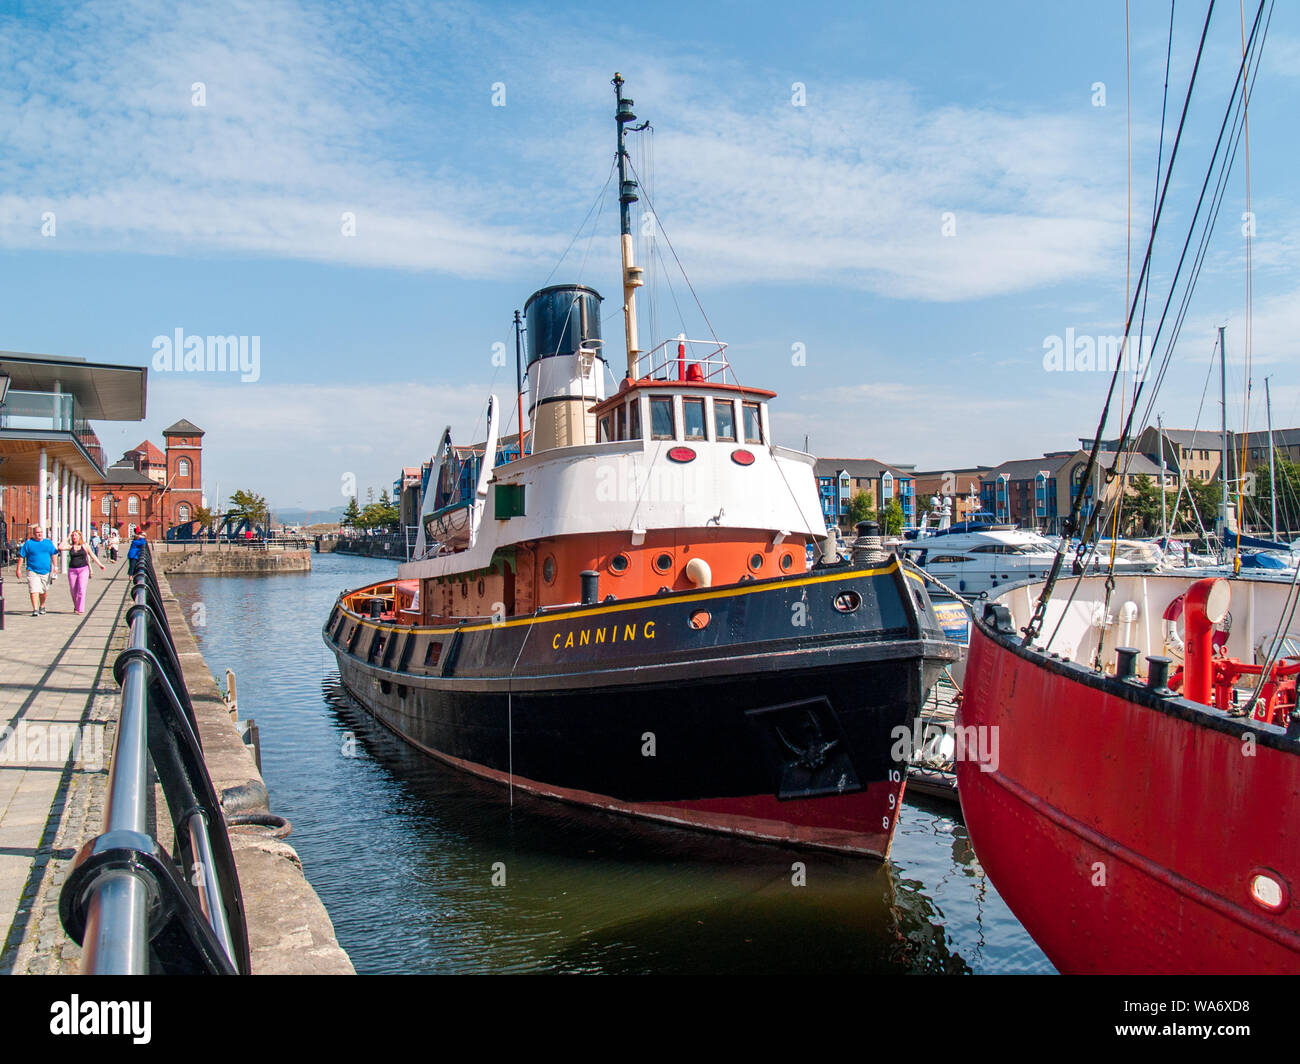 The Canning Tugboat at dock in Swansea Marina. Outside The National Waterfront Museum in Swansea, Wales, UK. Stock Photo